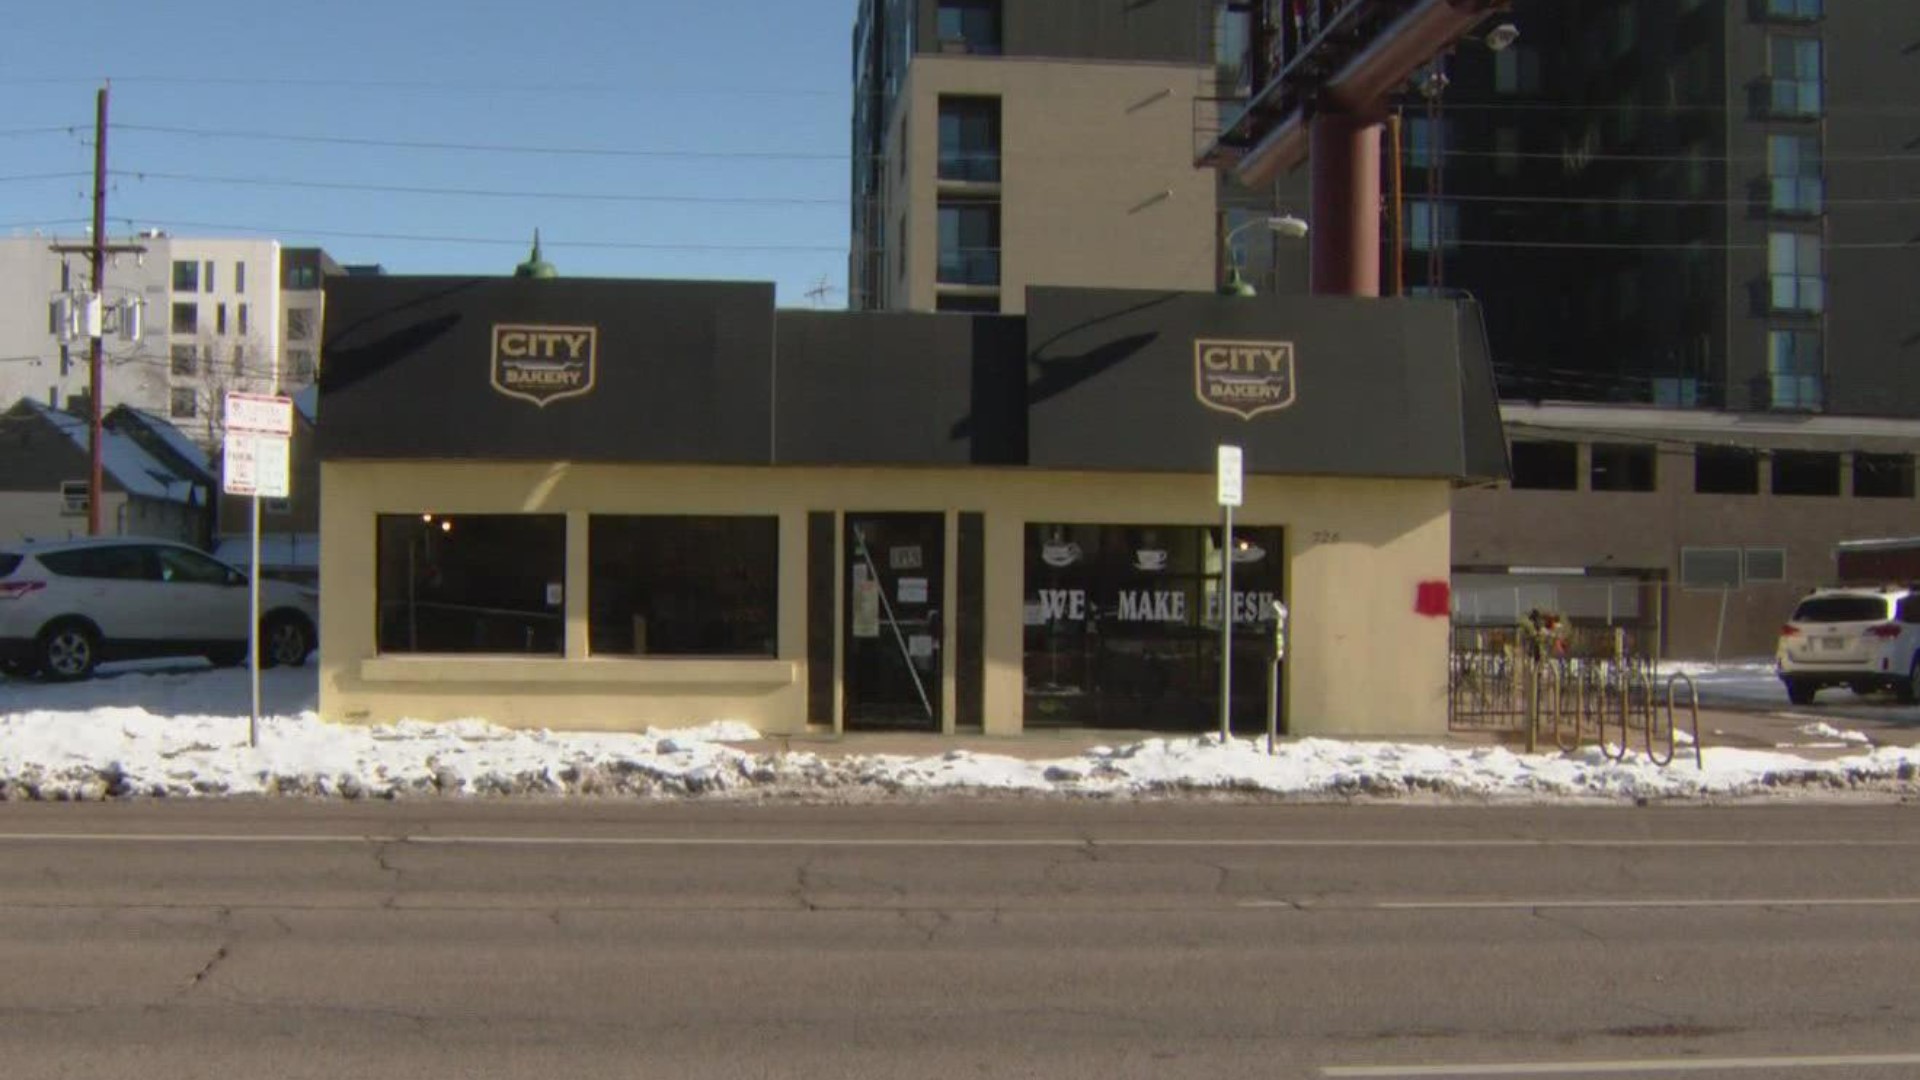 The cafe's owner says he'll eventually look for a new place for the City Cafe, which has been on Lincoln Street.